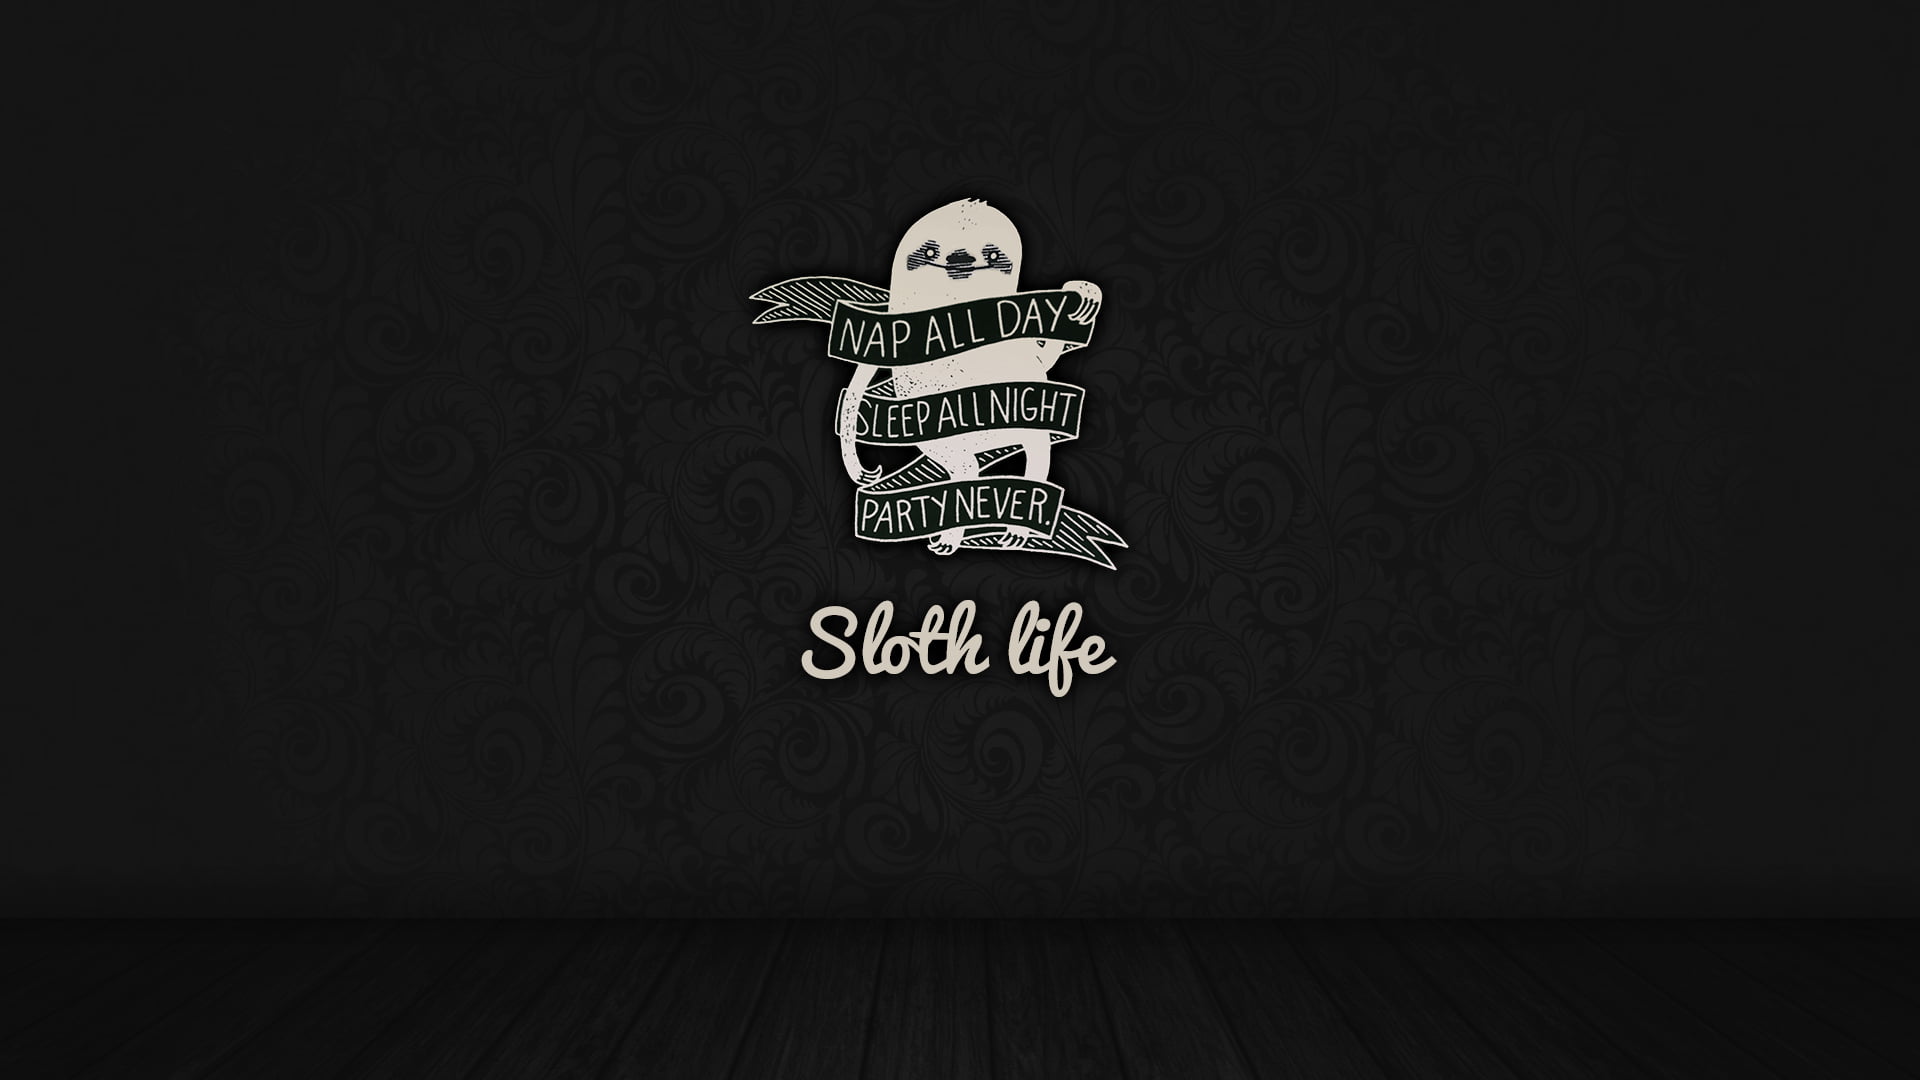 sloth life text, nap all day sleep all night party never sloth life